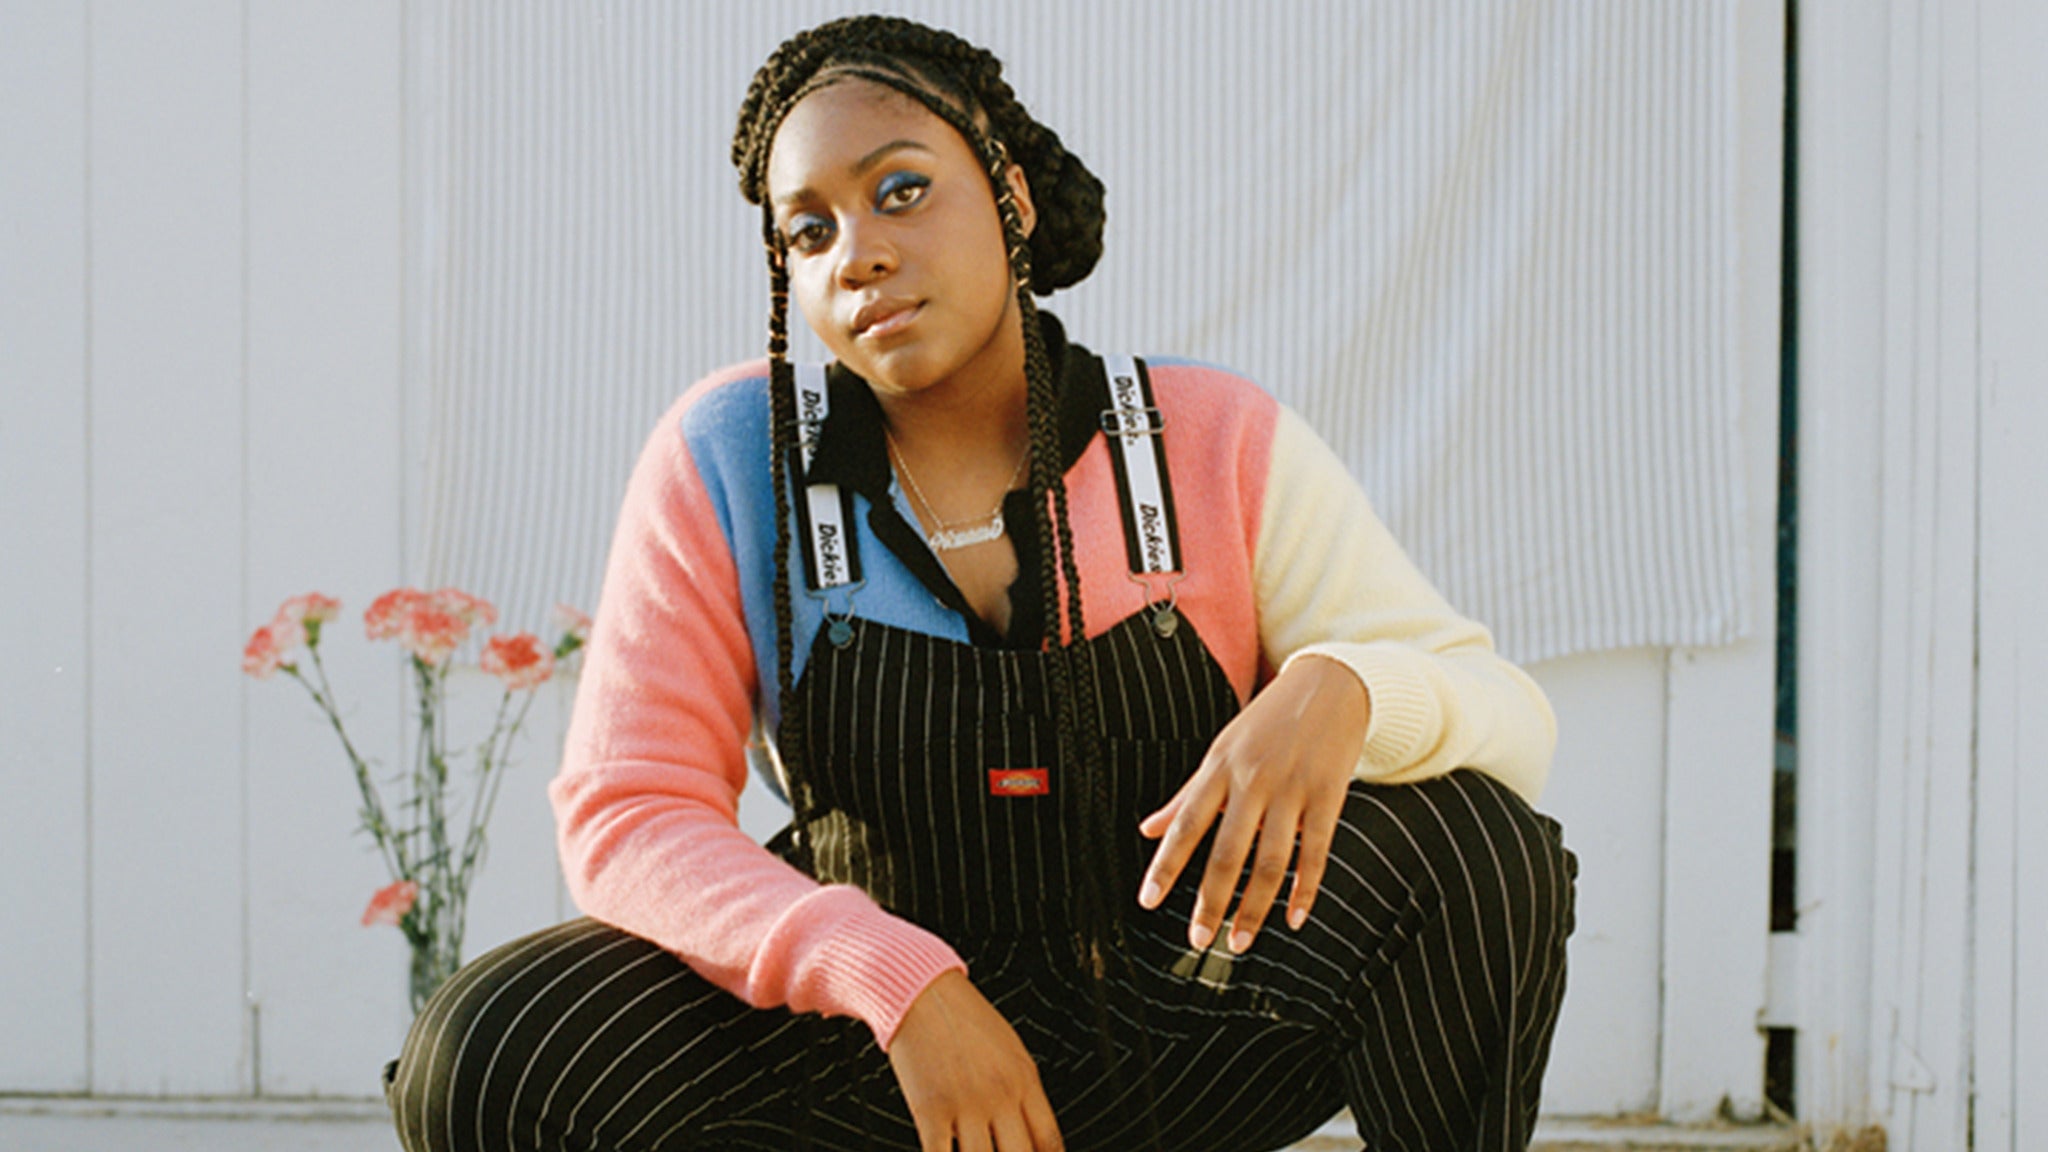 Noname in Los Angeles promo photo for Official Platinum presale offer code